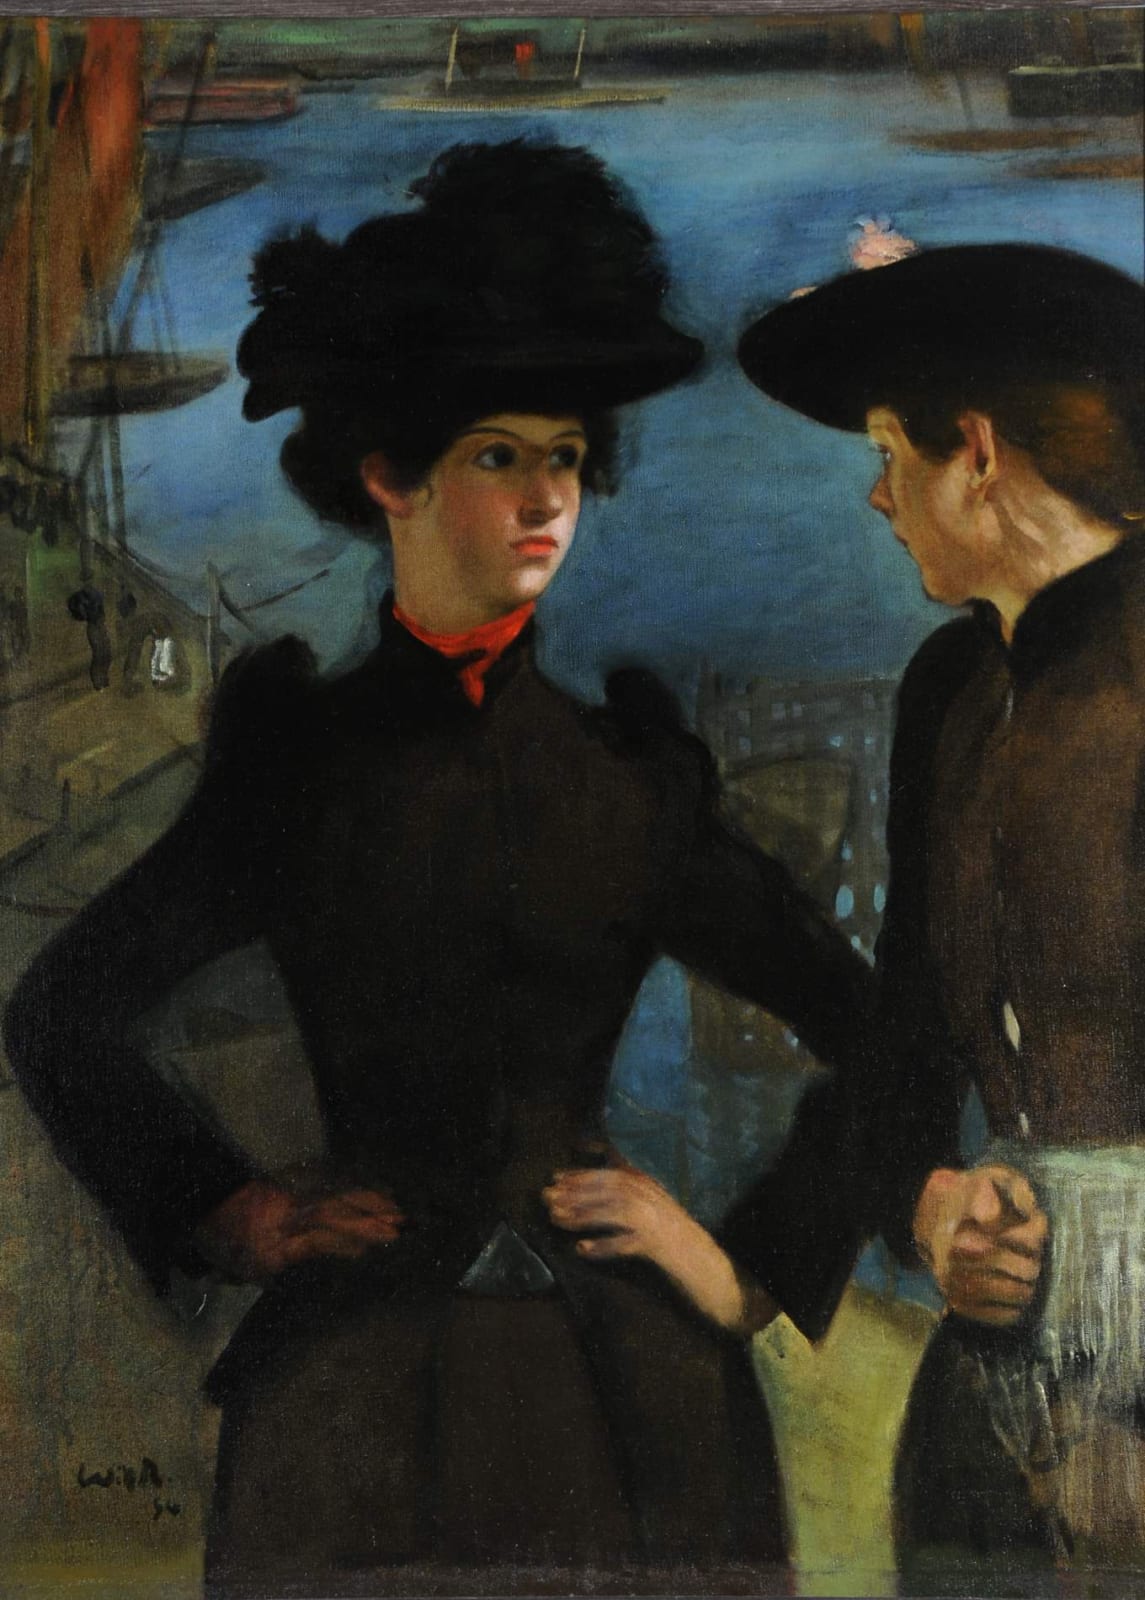 William Rothenstein (1872-1945) Coster Girls 1894 Oil on canvas 97.9 x 72 cm Museums Sheffield To see and discover more about this artist click here